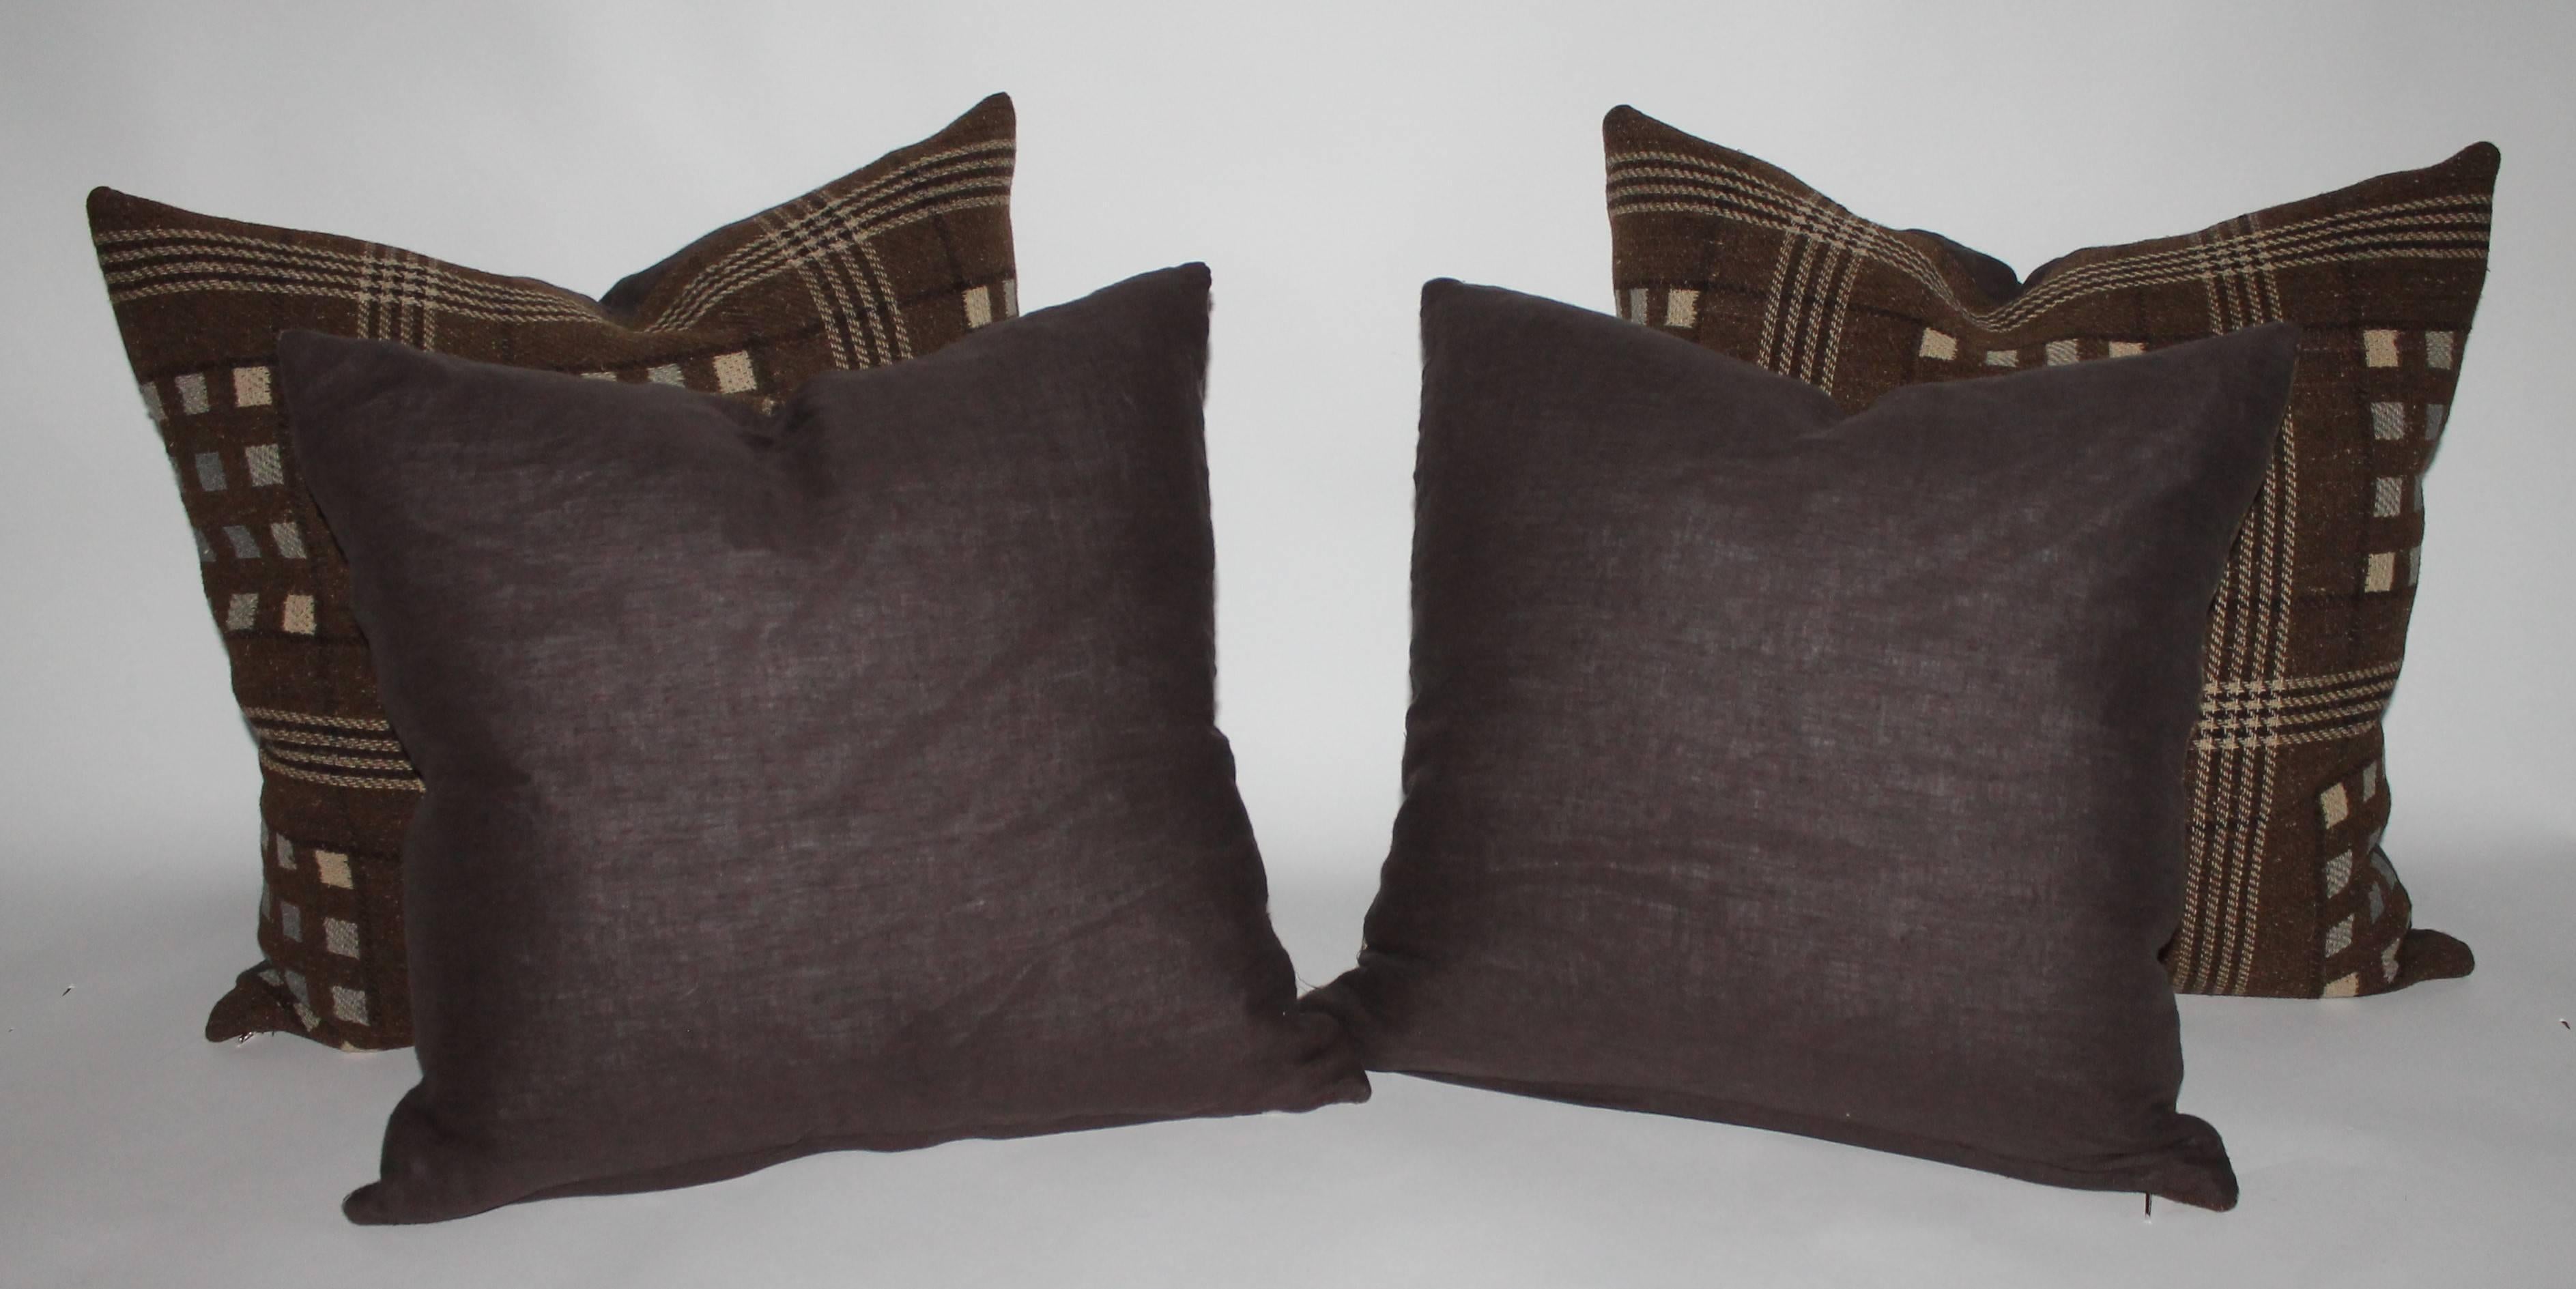 Hand-Woven Pair of 19th Century Wool Horse Blanket Pillows